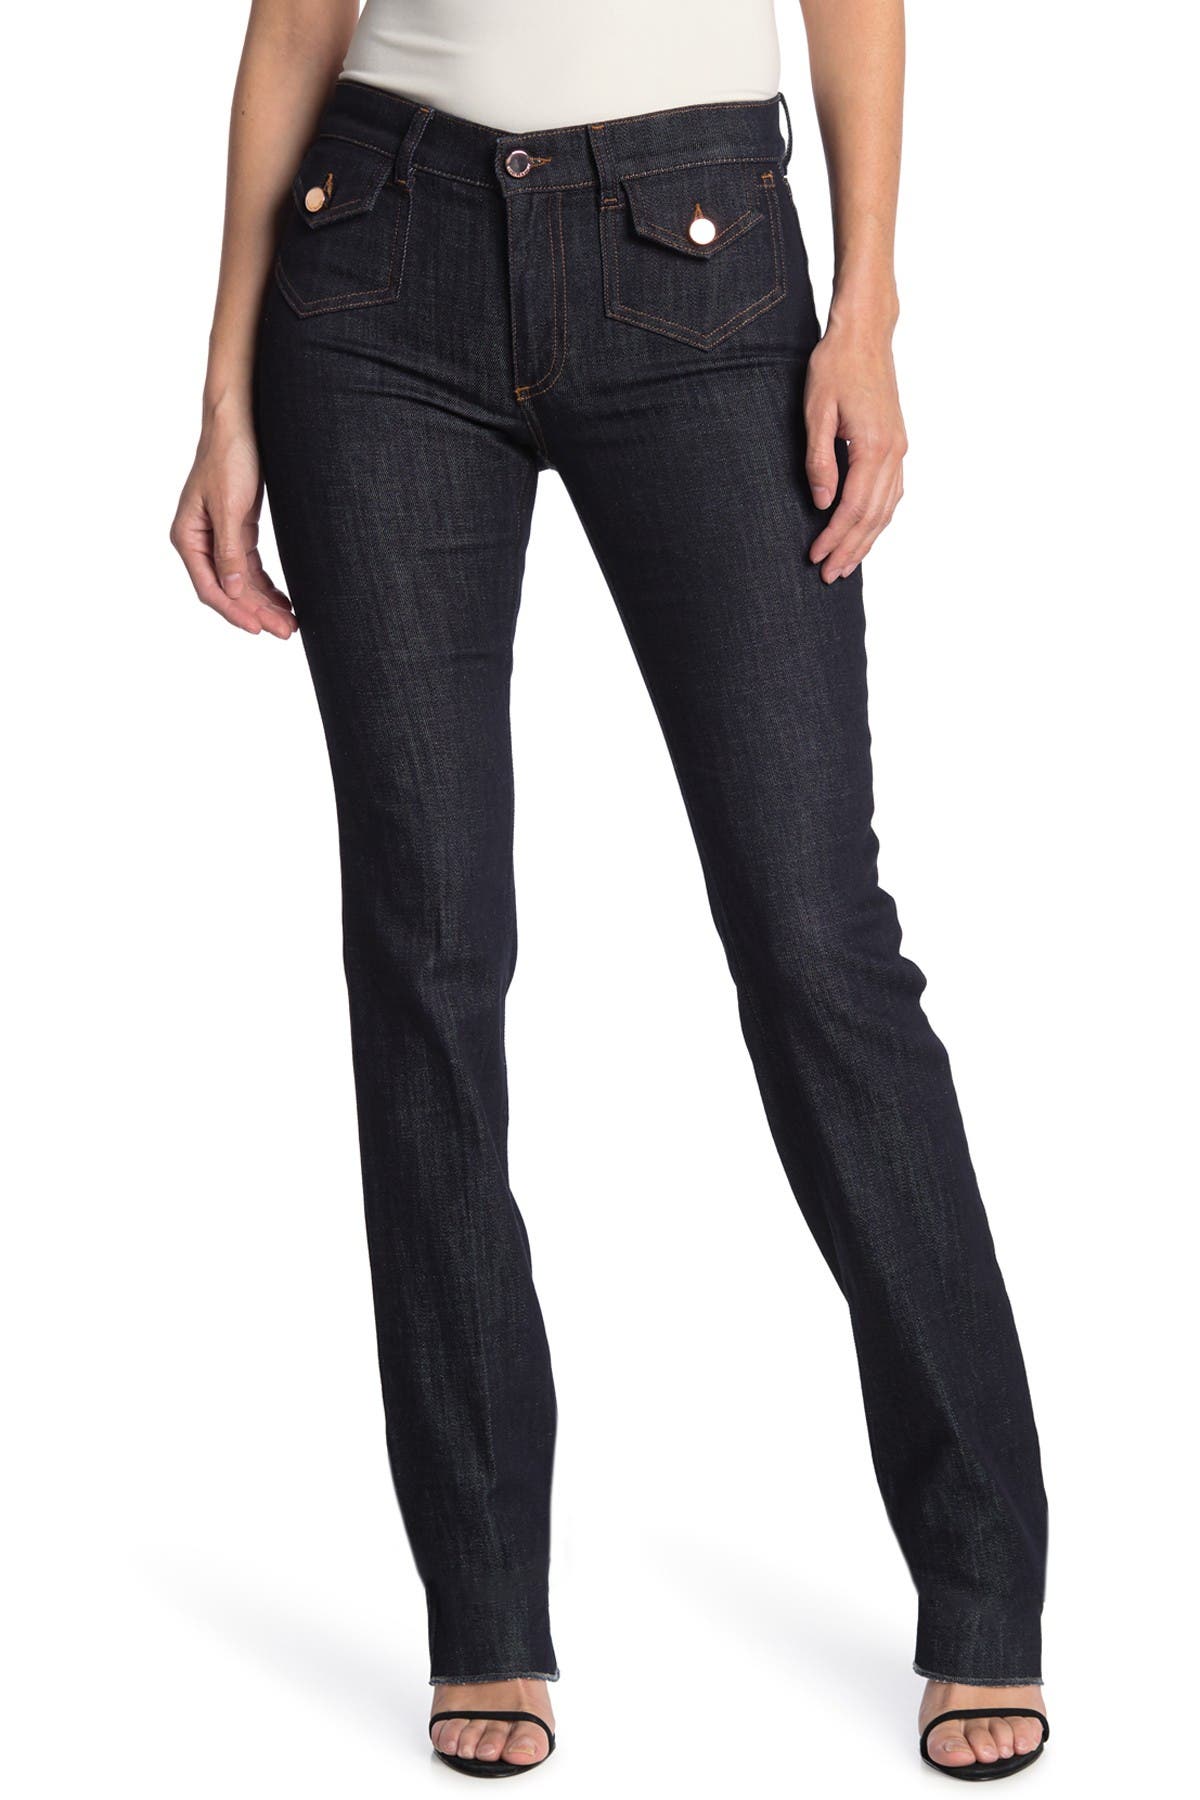 Red Valentino Flap Pocket Bootcut Jeans In Blue Denim